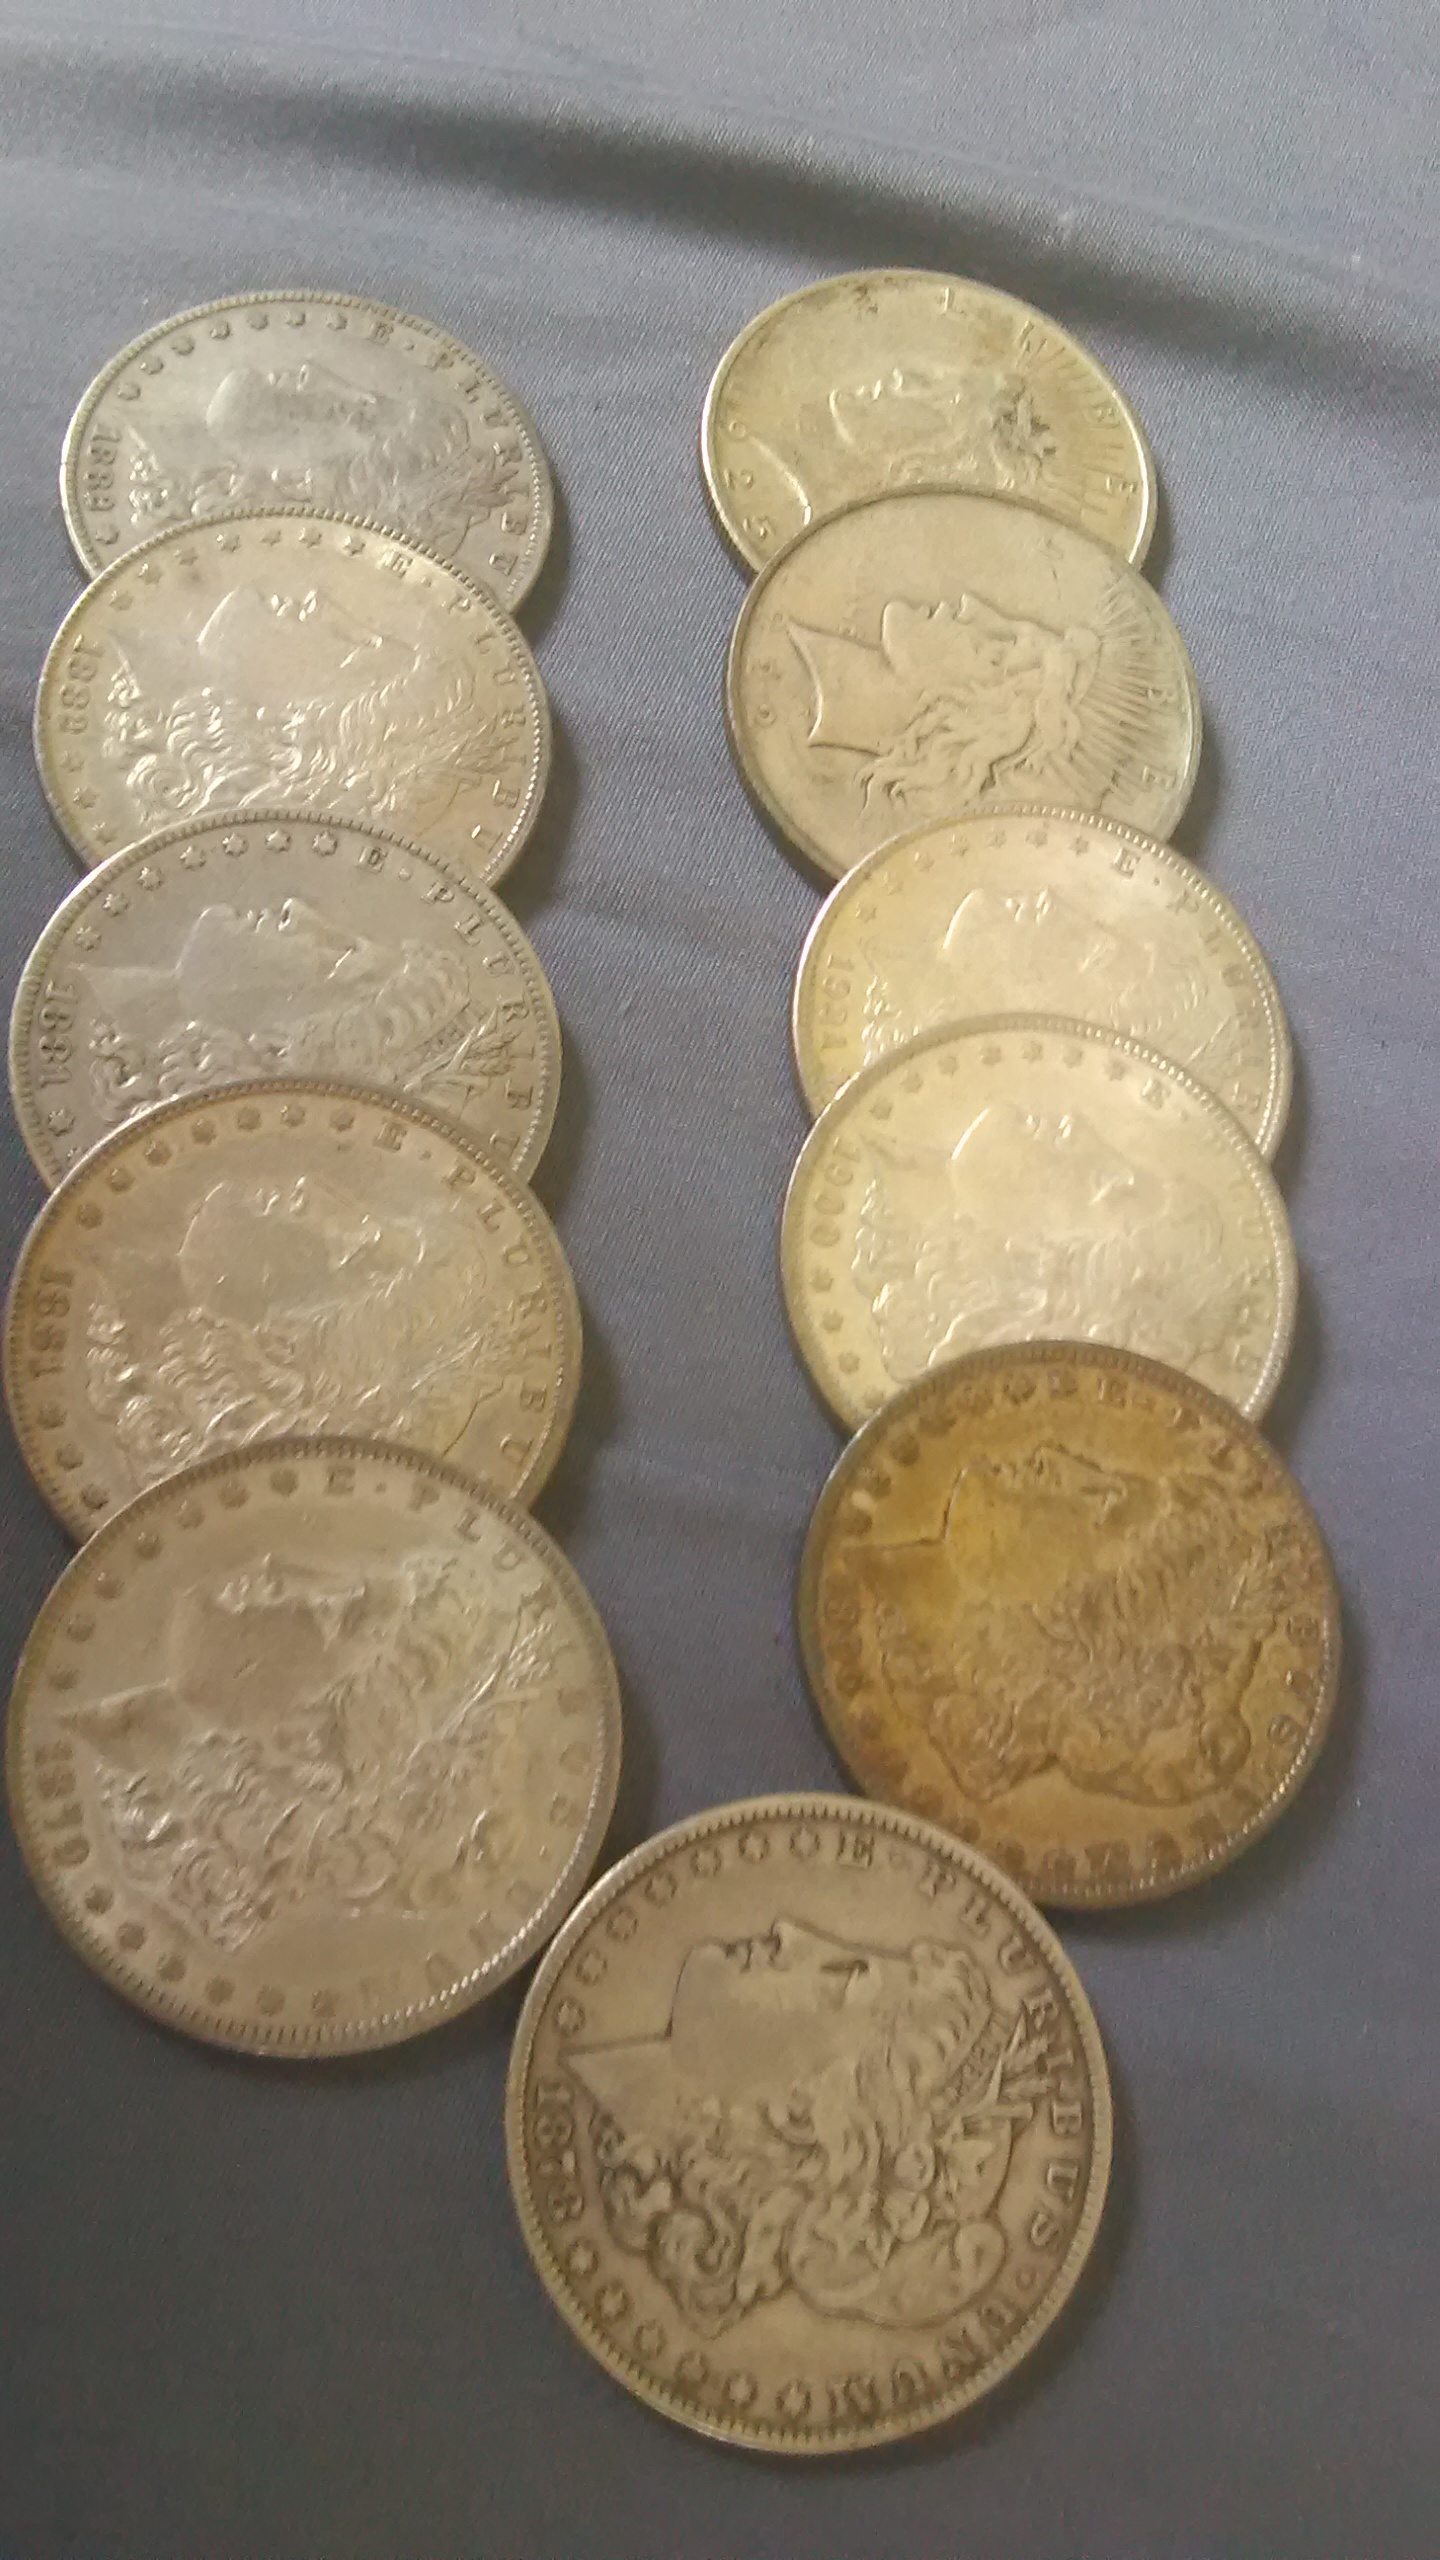 What are some tips for selling foreign coins?